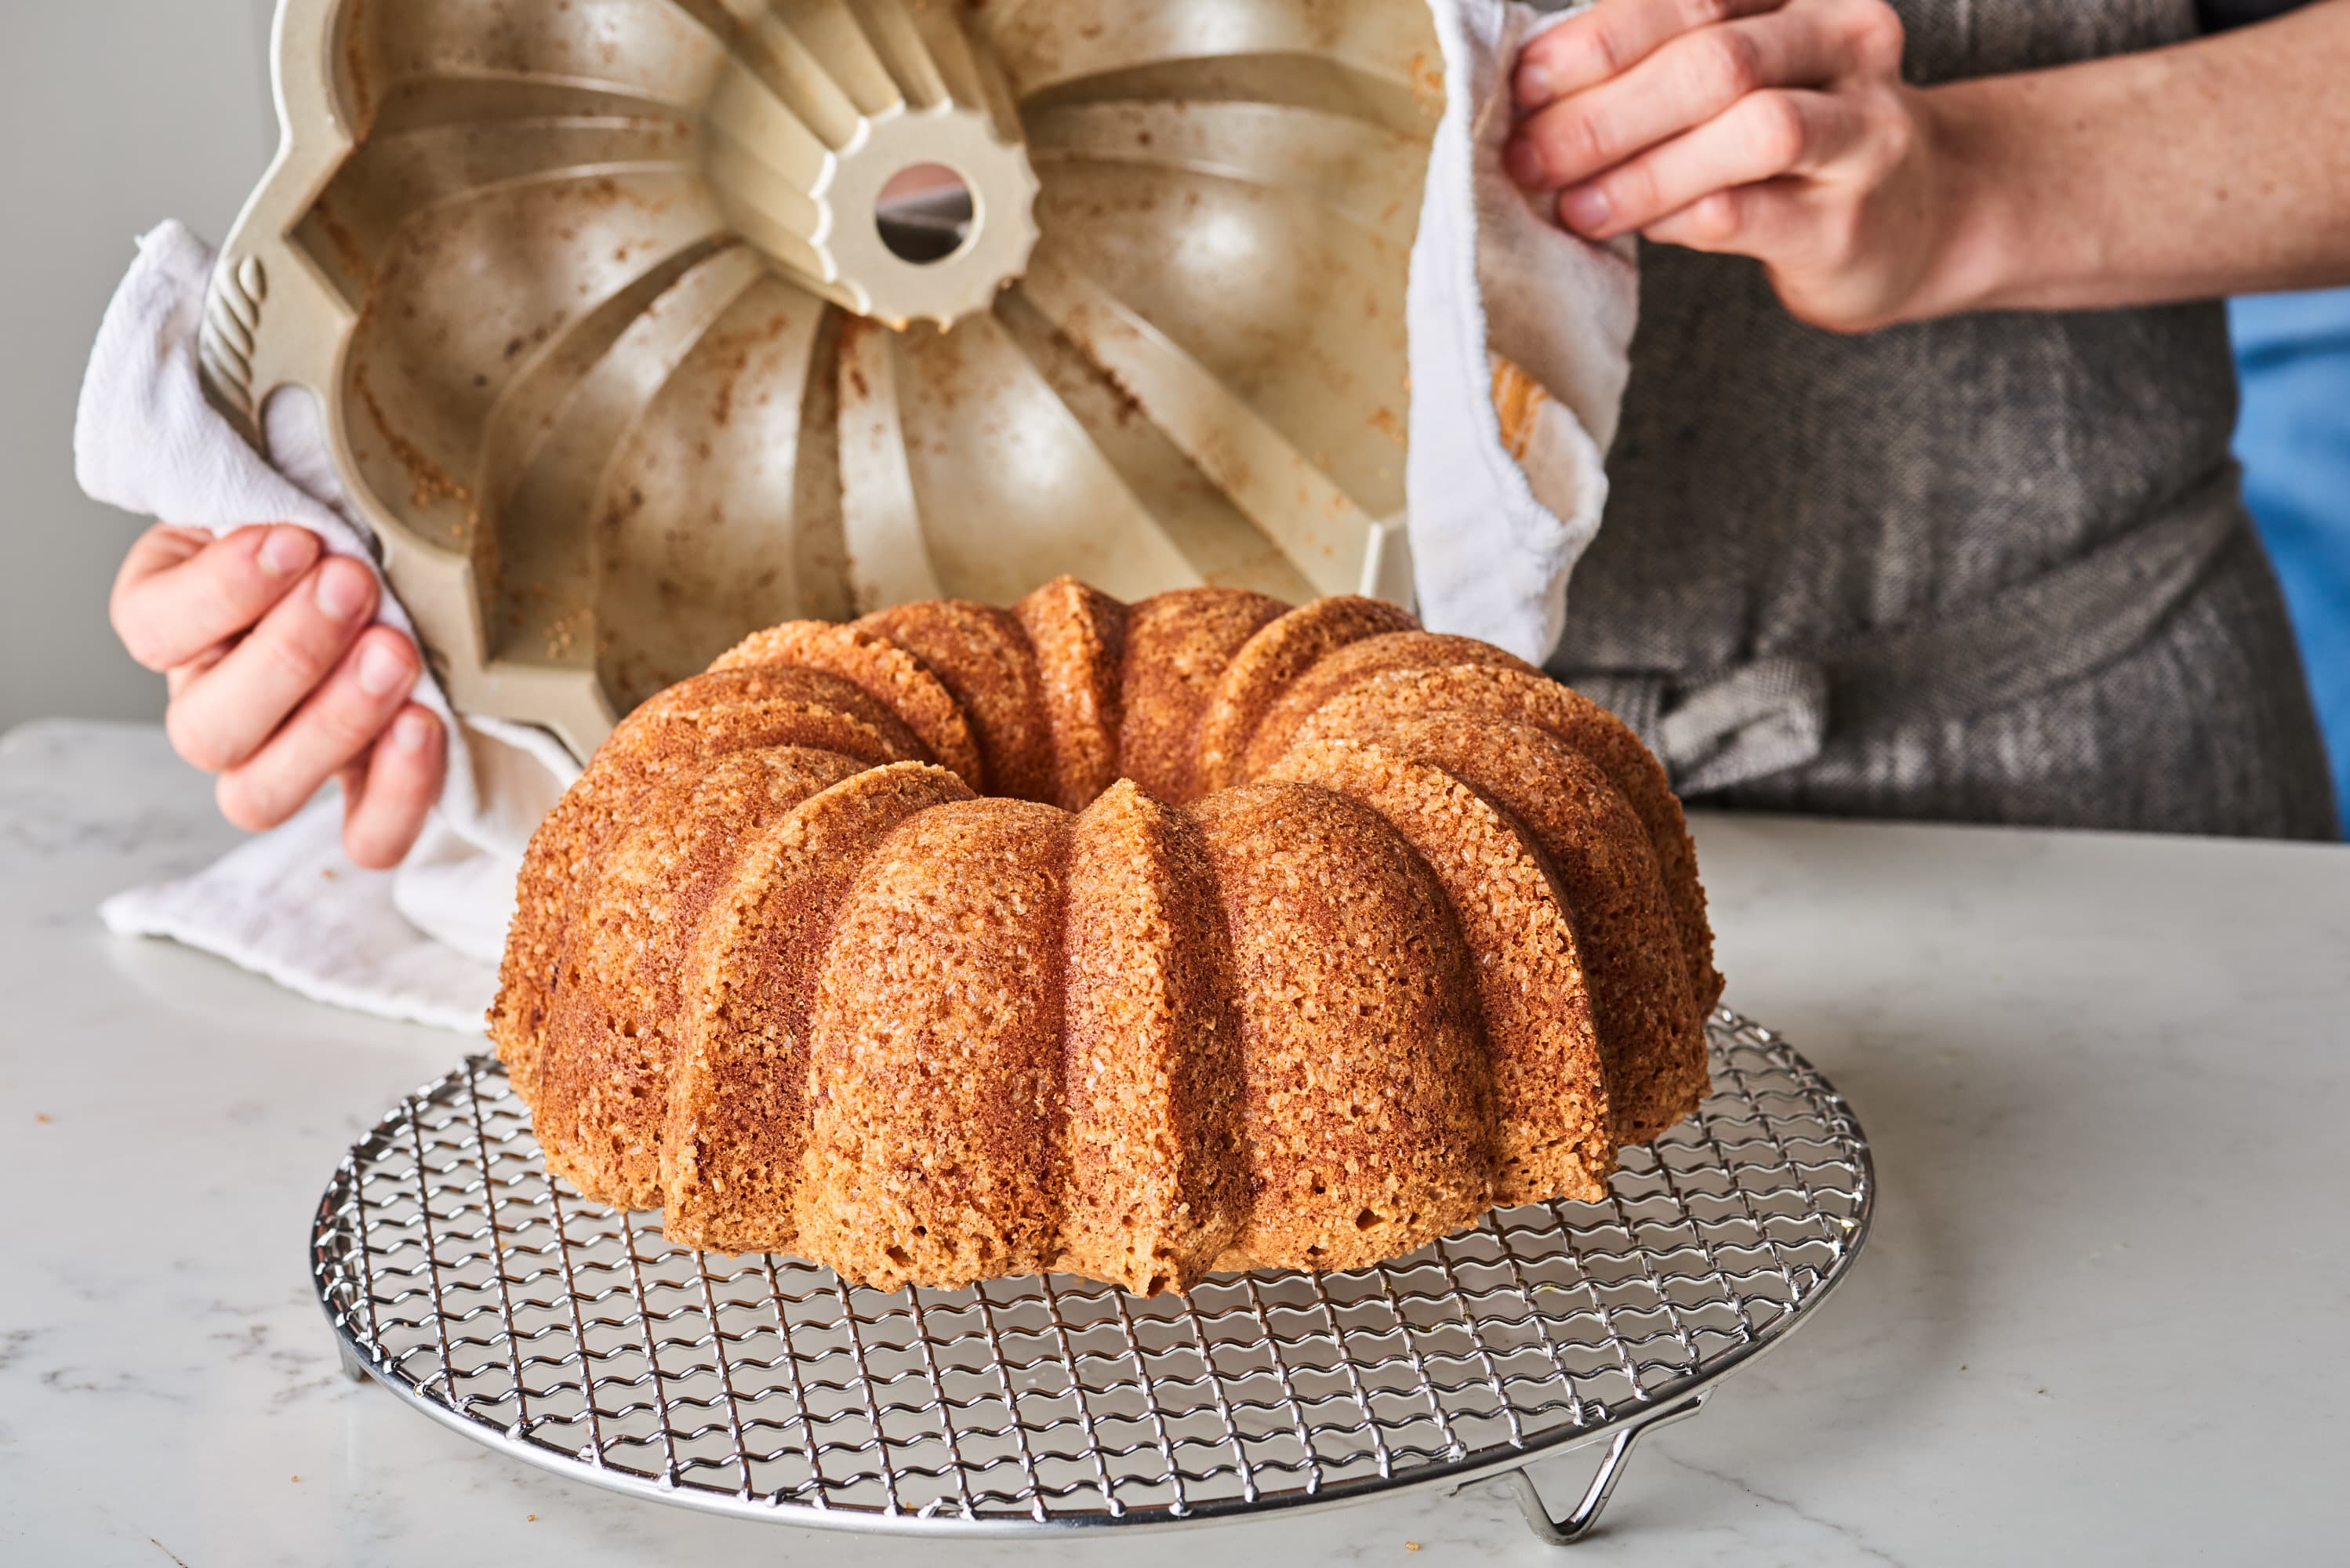 https://cdn.apartmenttherapy.info/image/upload/v1583185812/k/Photo/Recipes/2020-03-How-to-Ultimate-Foolproof-Bundt/2020-02-24_AT-K_104521.jpg